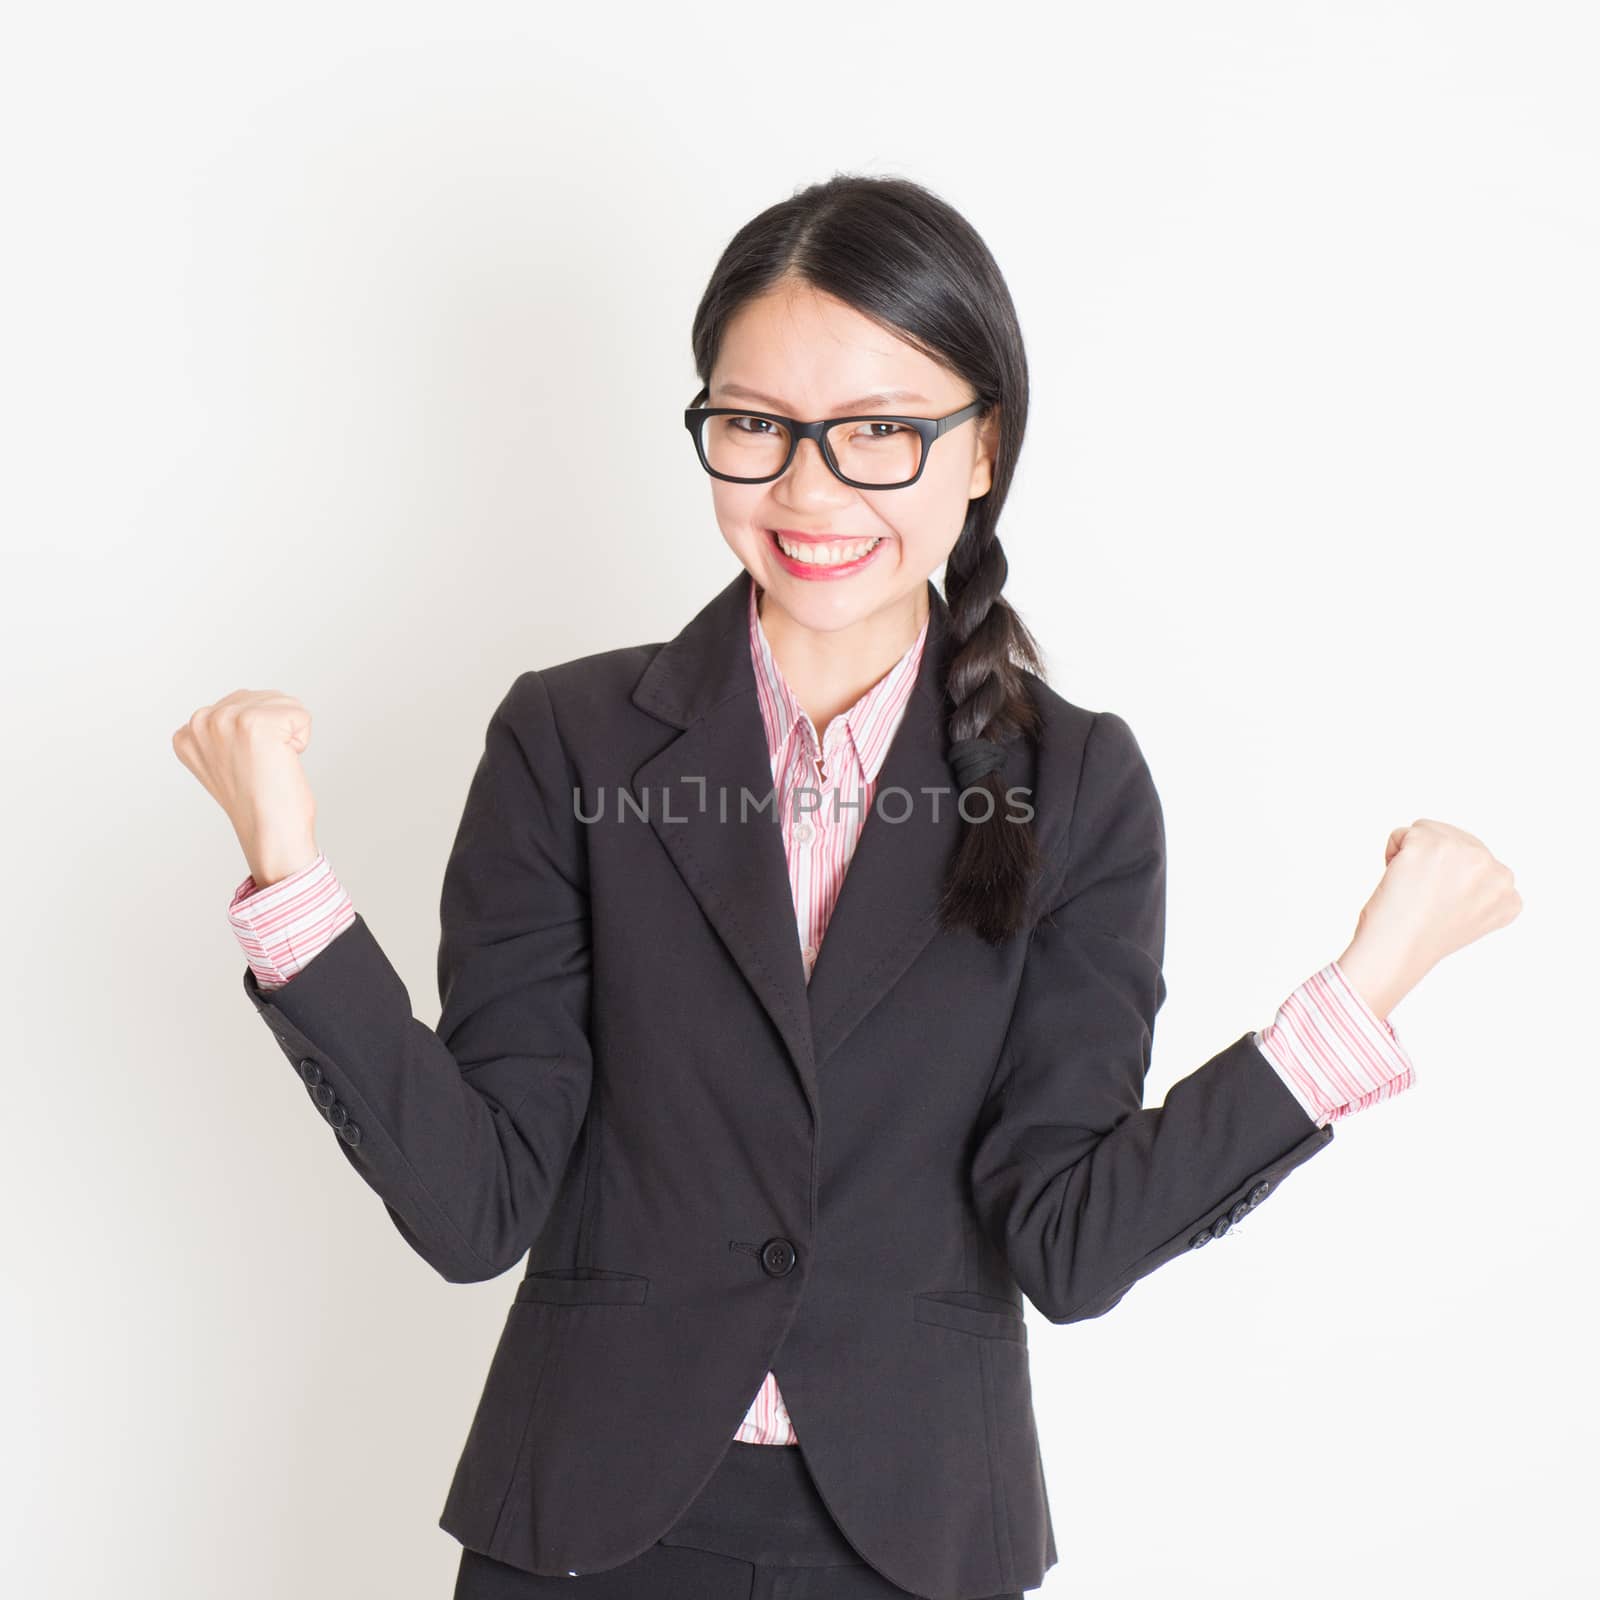 Portrait of Asian businesswoman in formalwear smiling and celebrating success, standing on plain background.